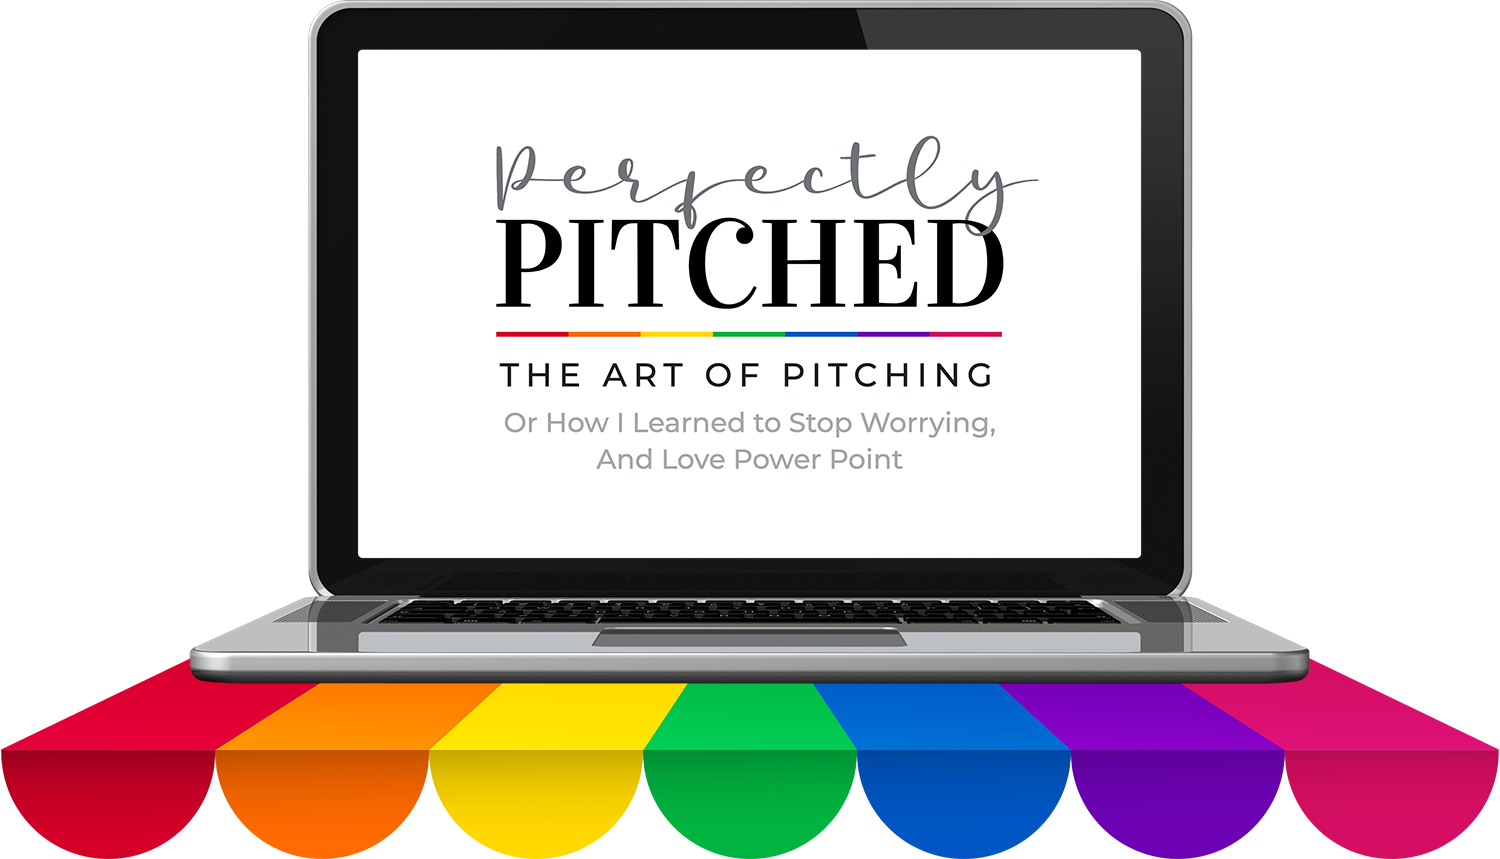 The Art of Pitching class taught by Heather Lawver of Perfectly Pitched